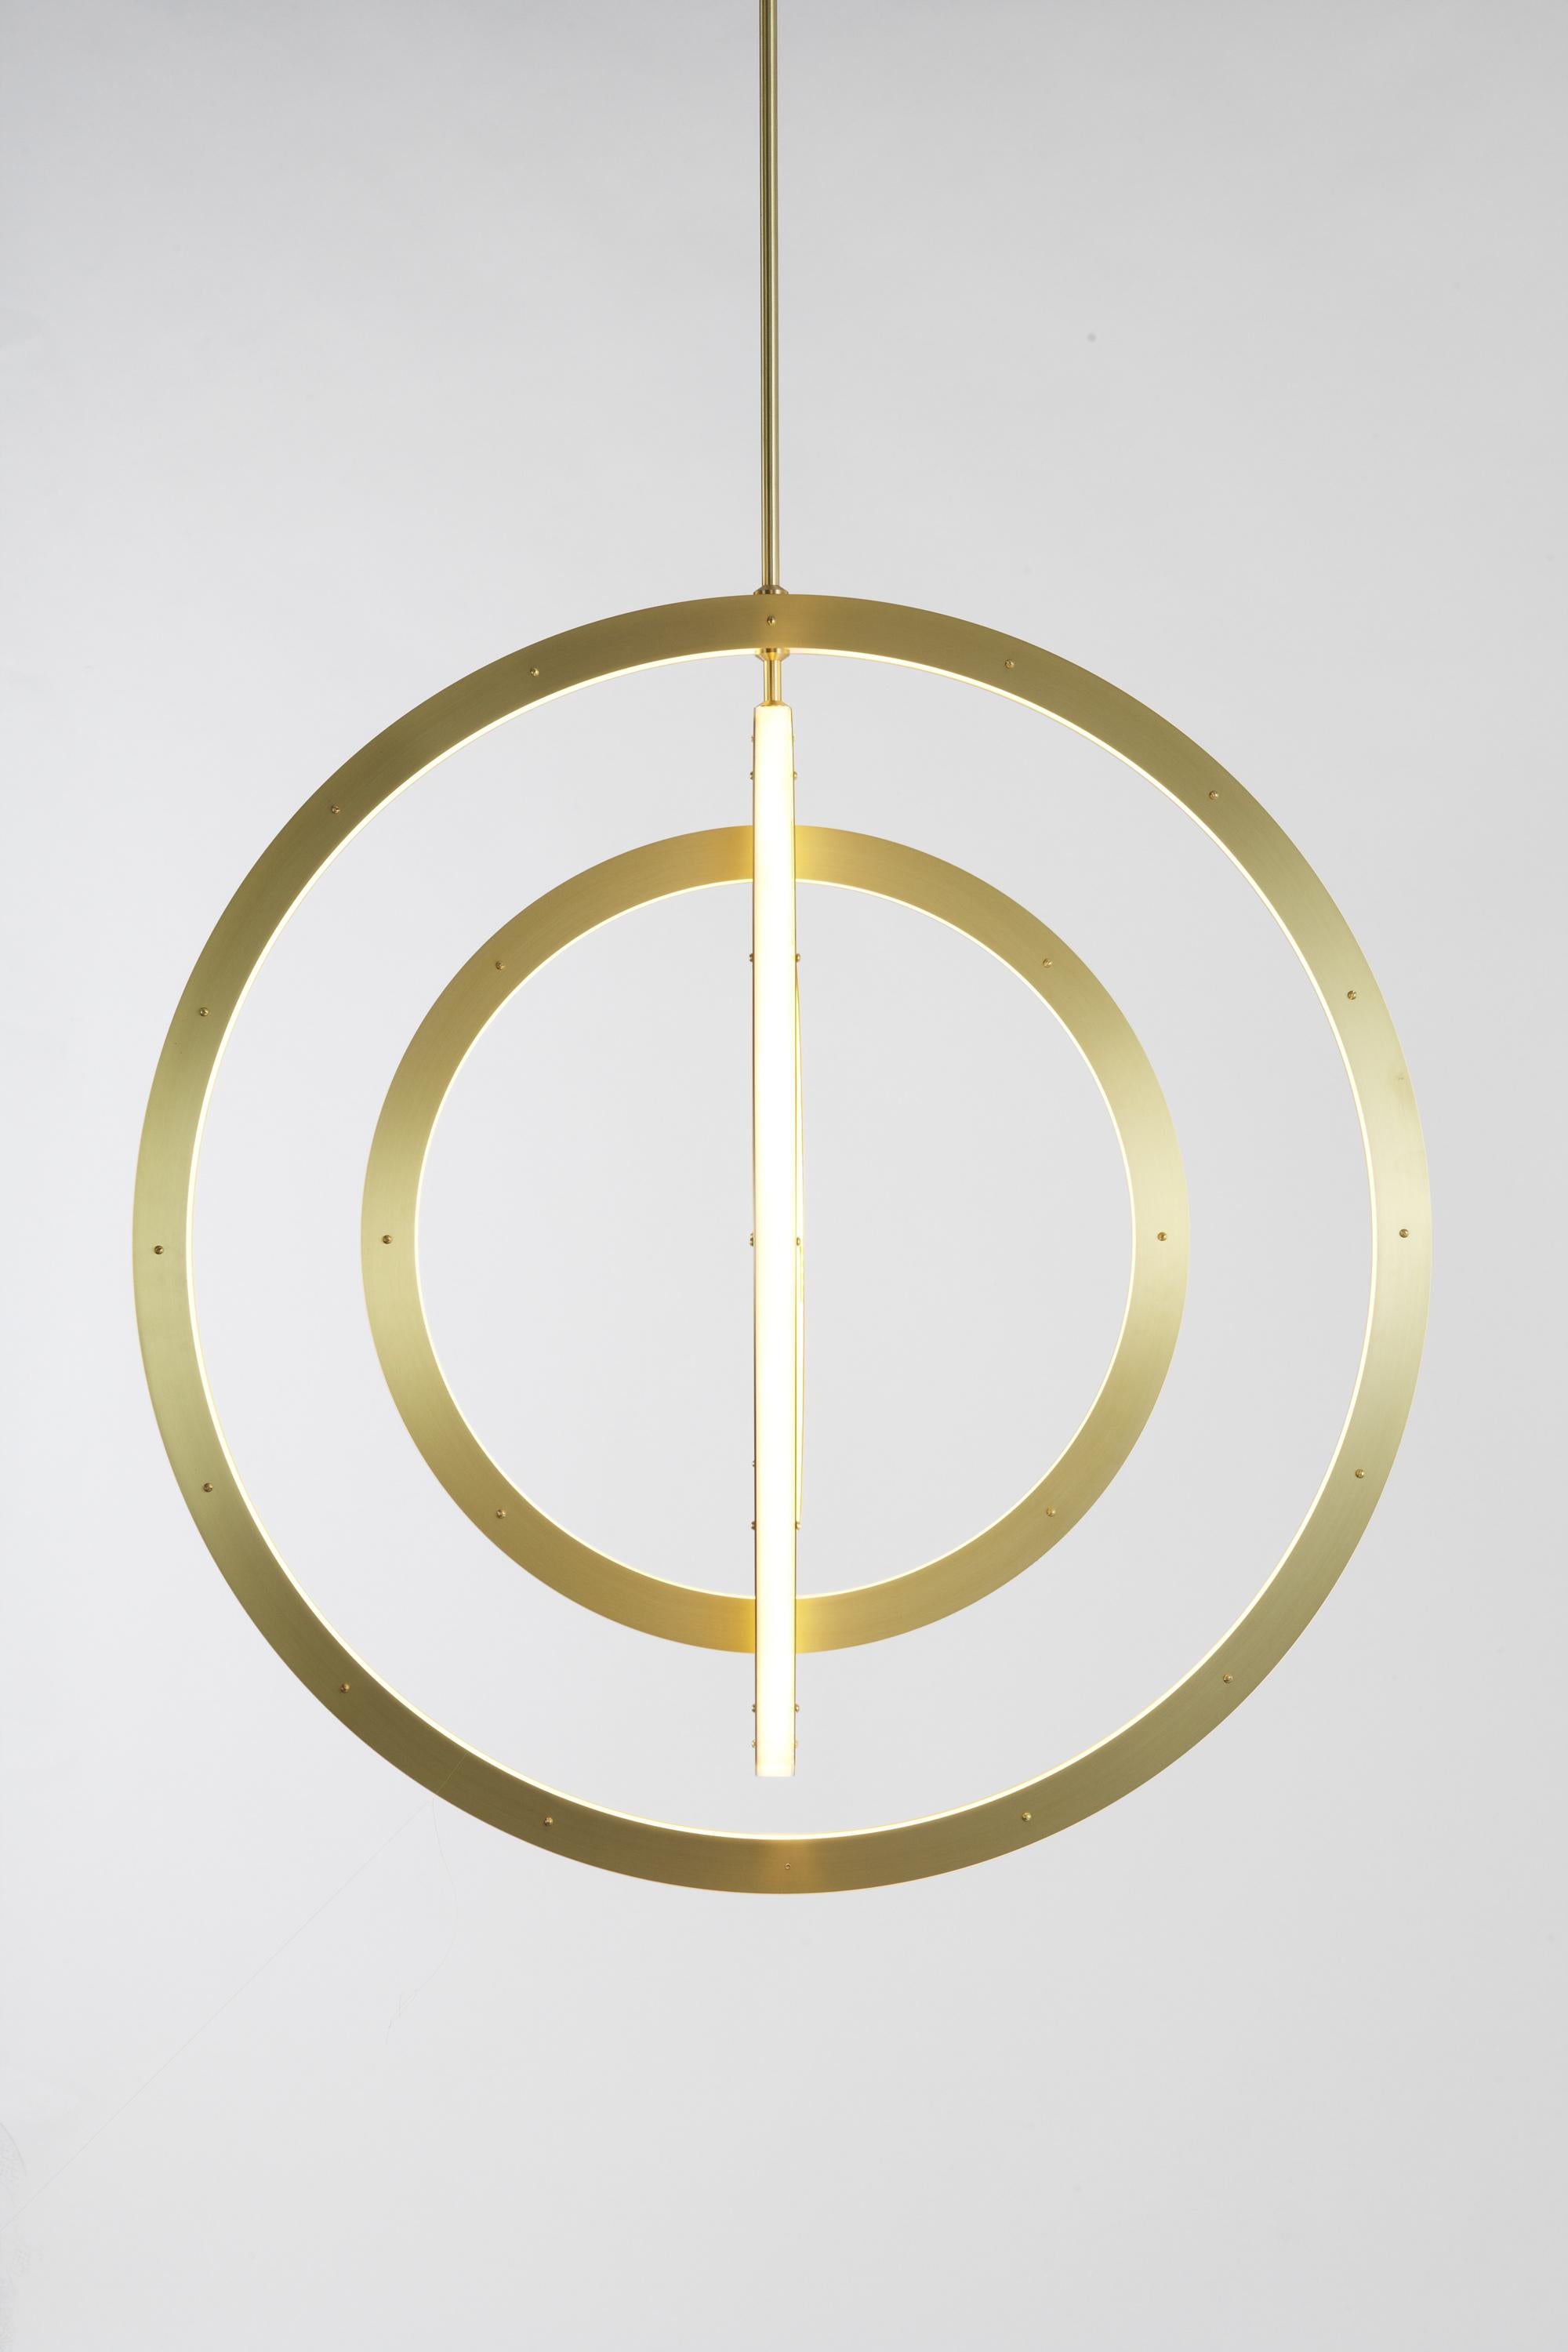 Paul Loebach envisioned the Halo series as a graceful exercise in the use of energy-efficient LED technology. The collection, which includes a range of ceiling and wall lights, is distinguished by its use of cascading rings and bars of